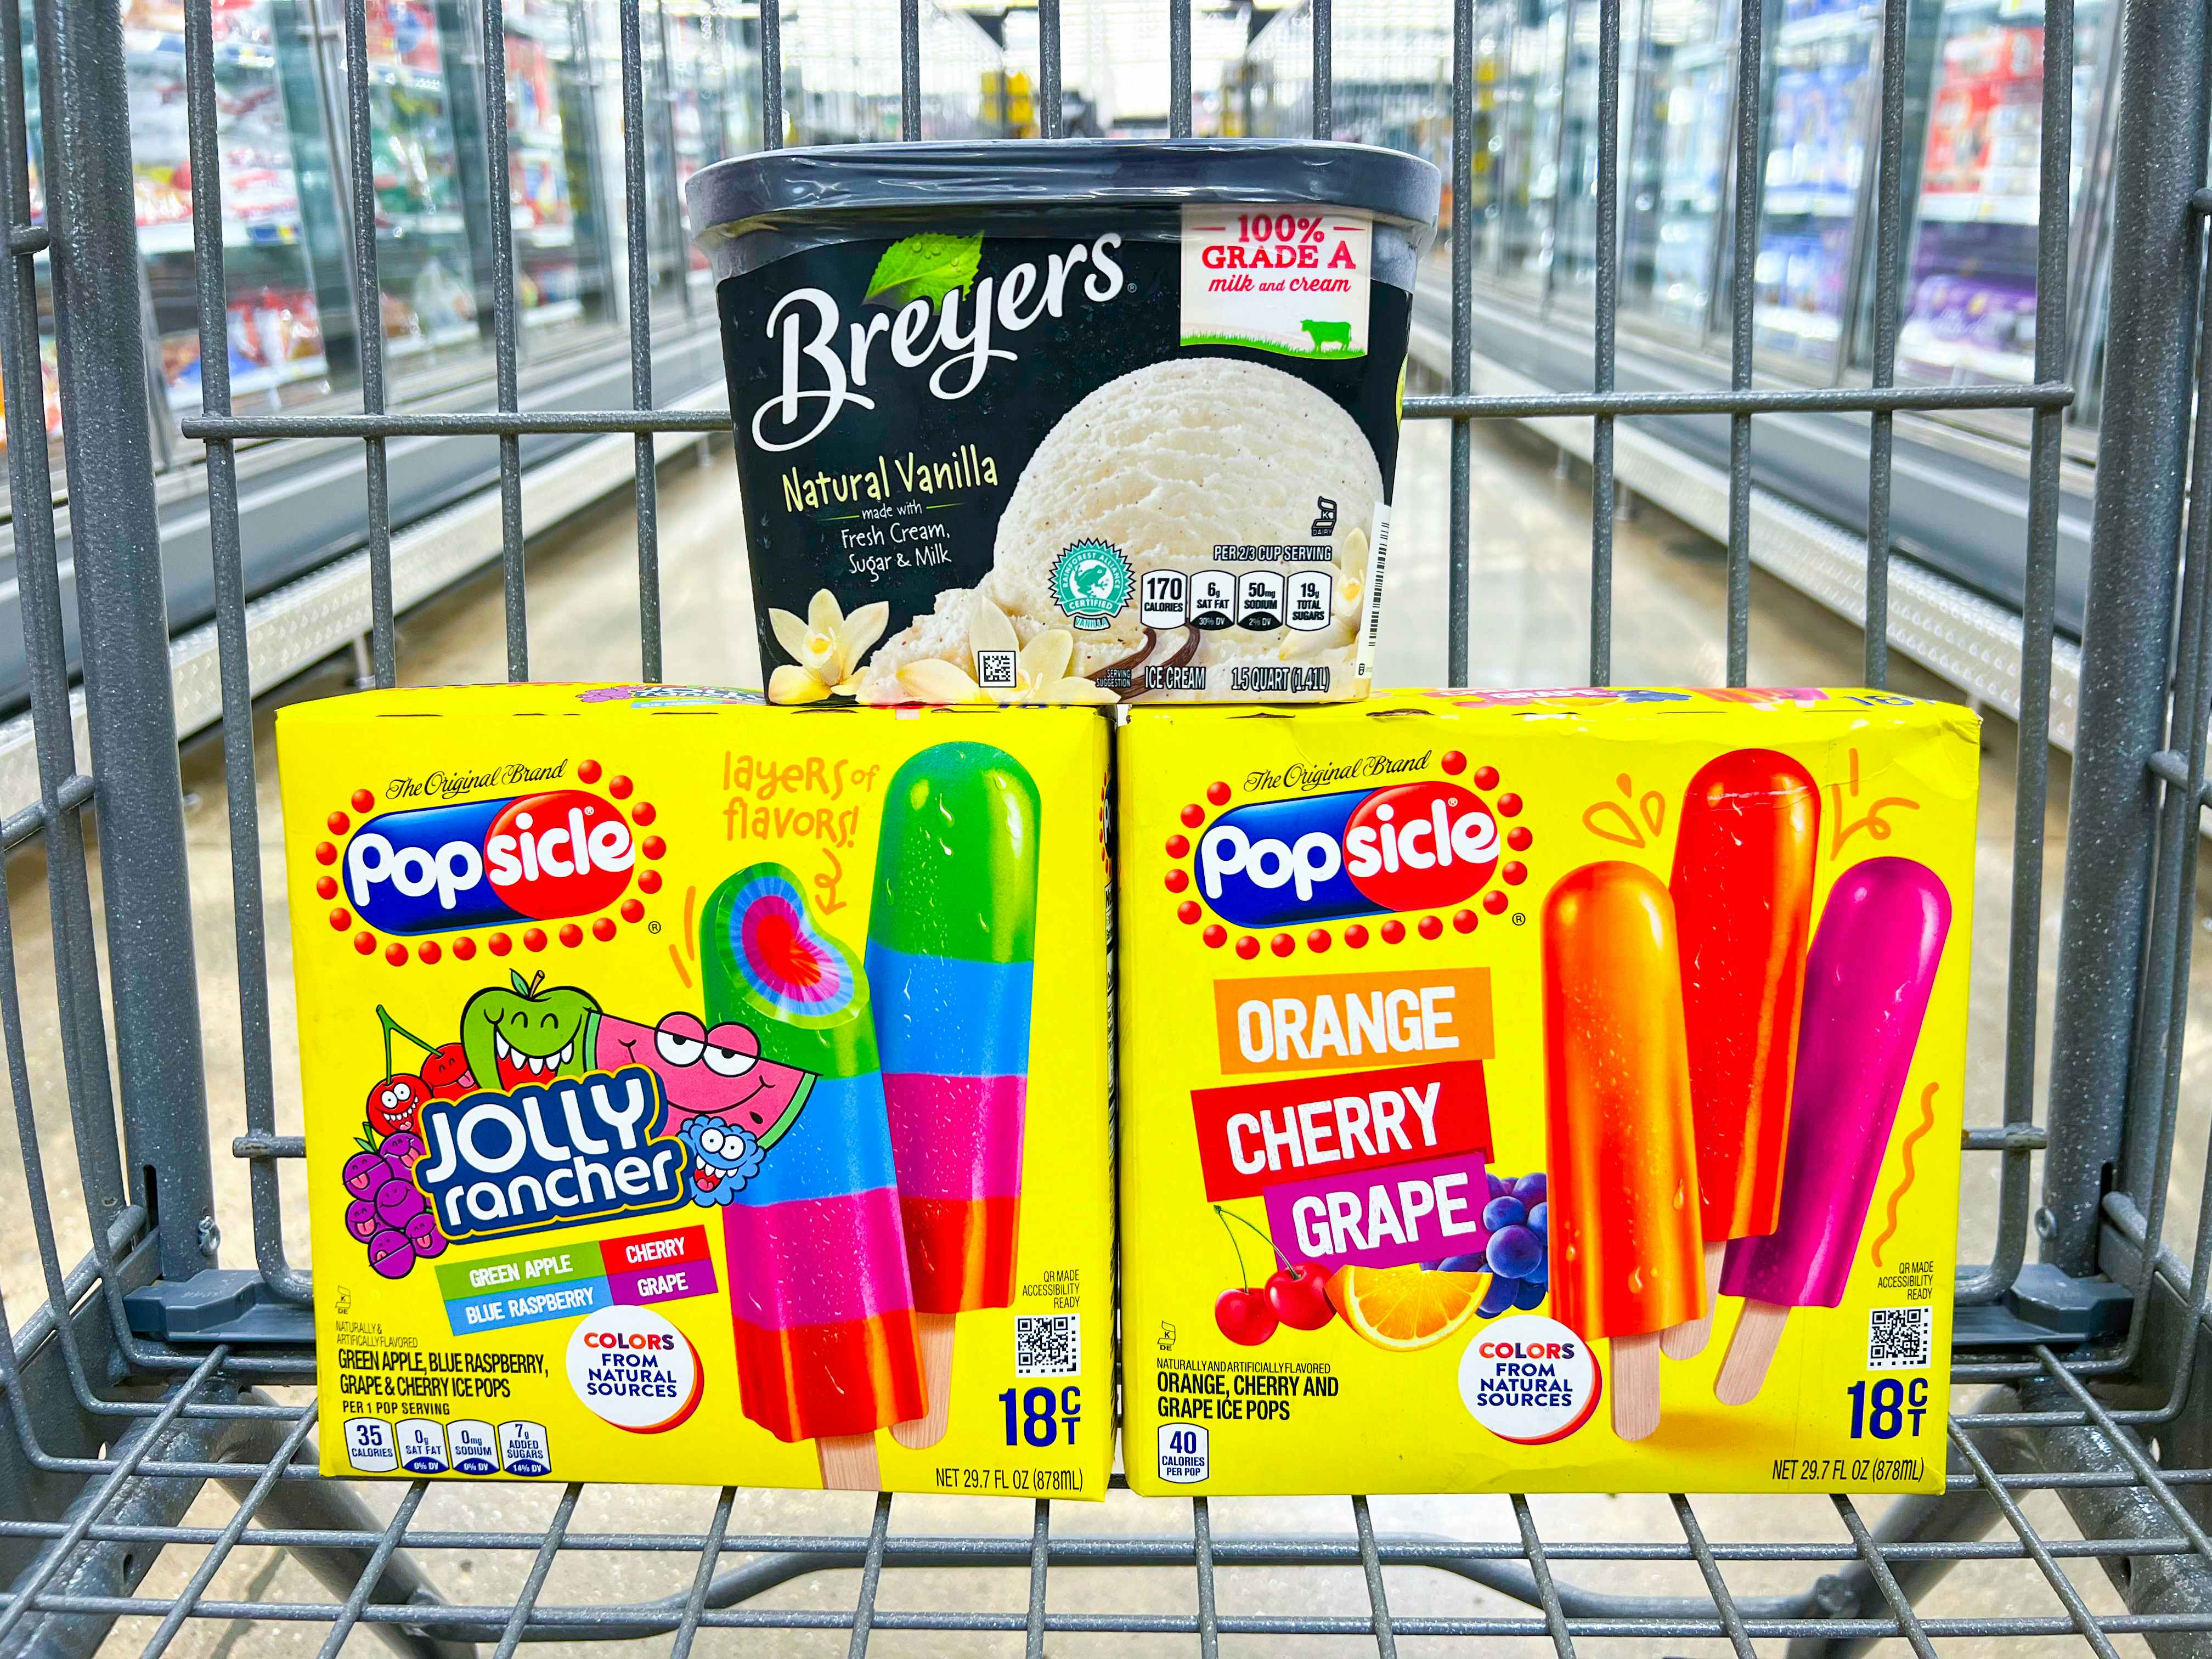 Popsicle and Breyers, Only $2.50 at Stop & Shop